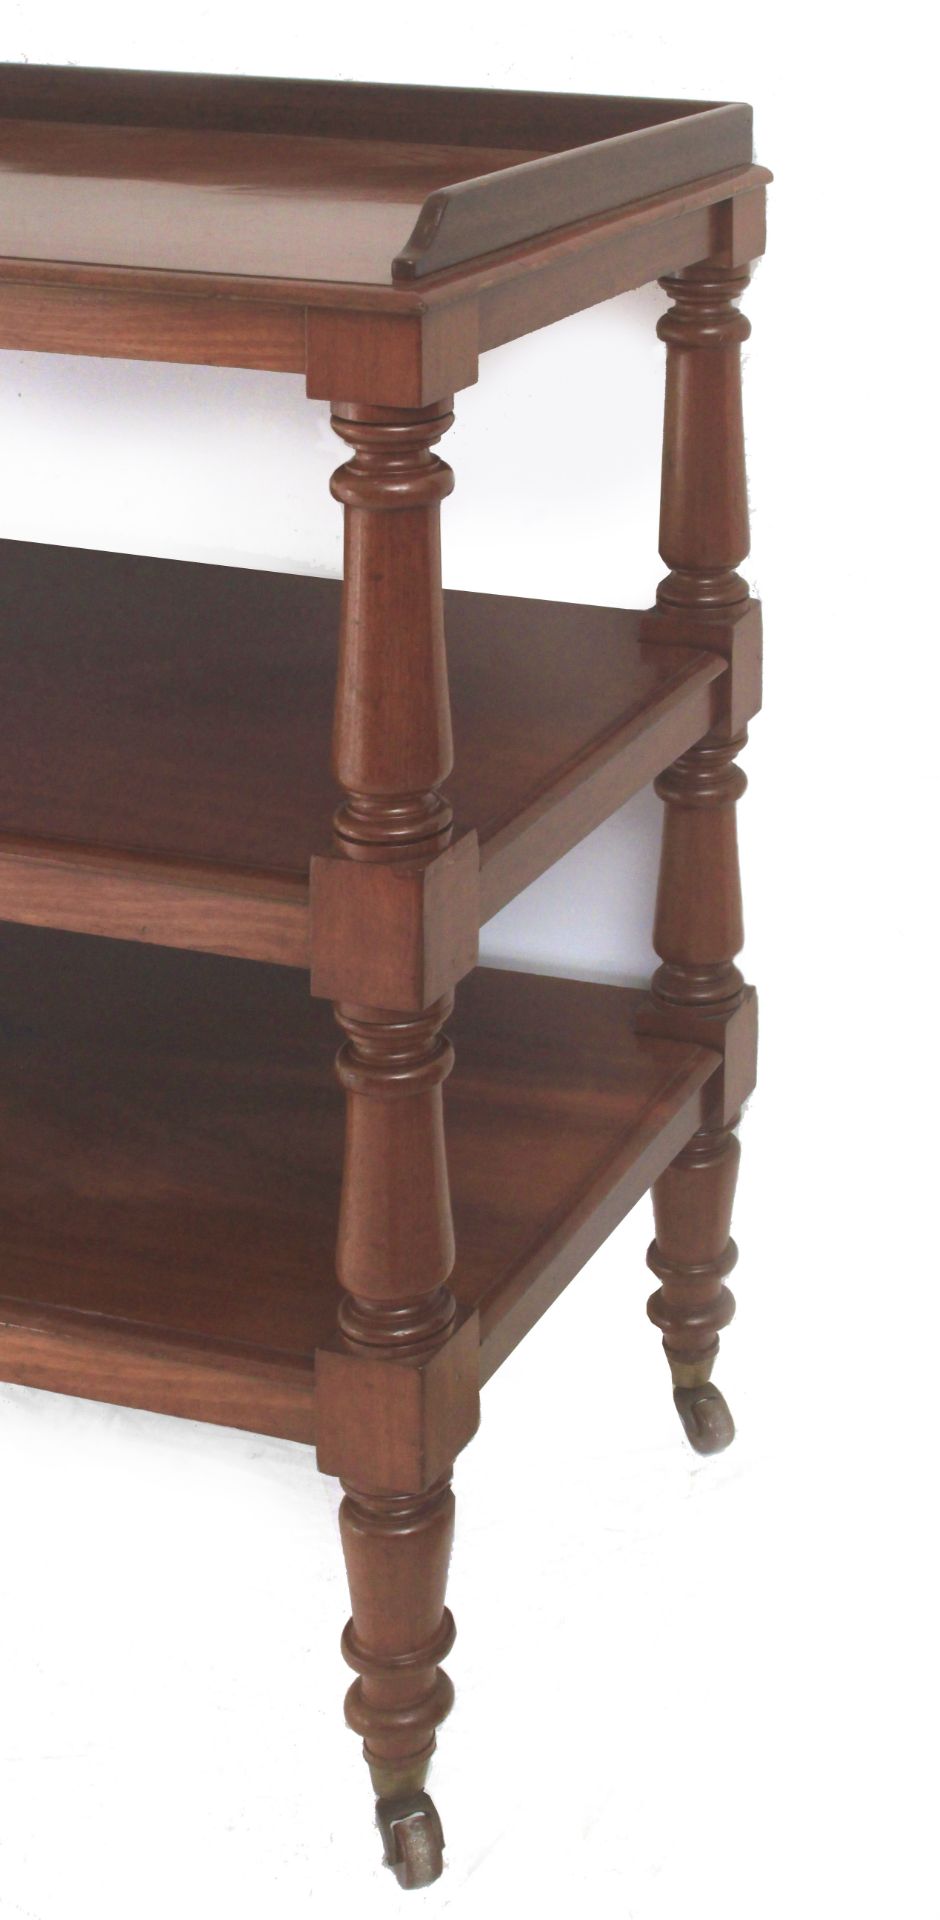 A Victorian mahogany silent servant pedestal table, England, 19th century - Image 3 of 3